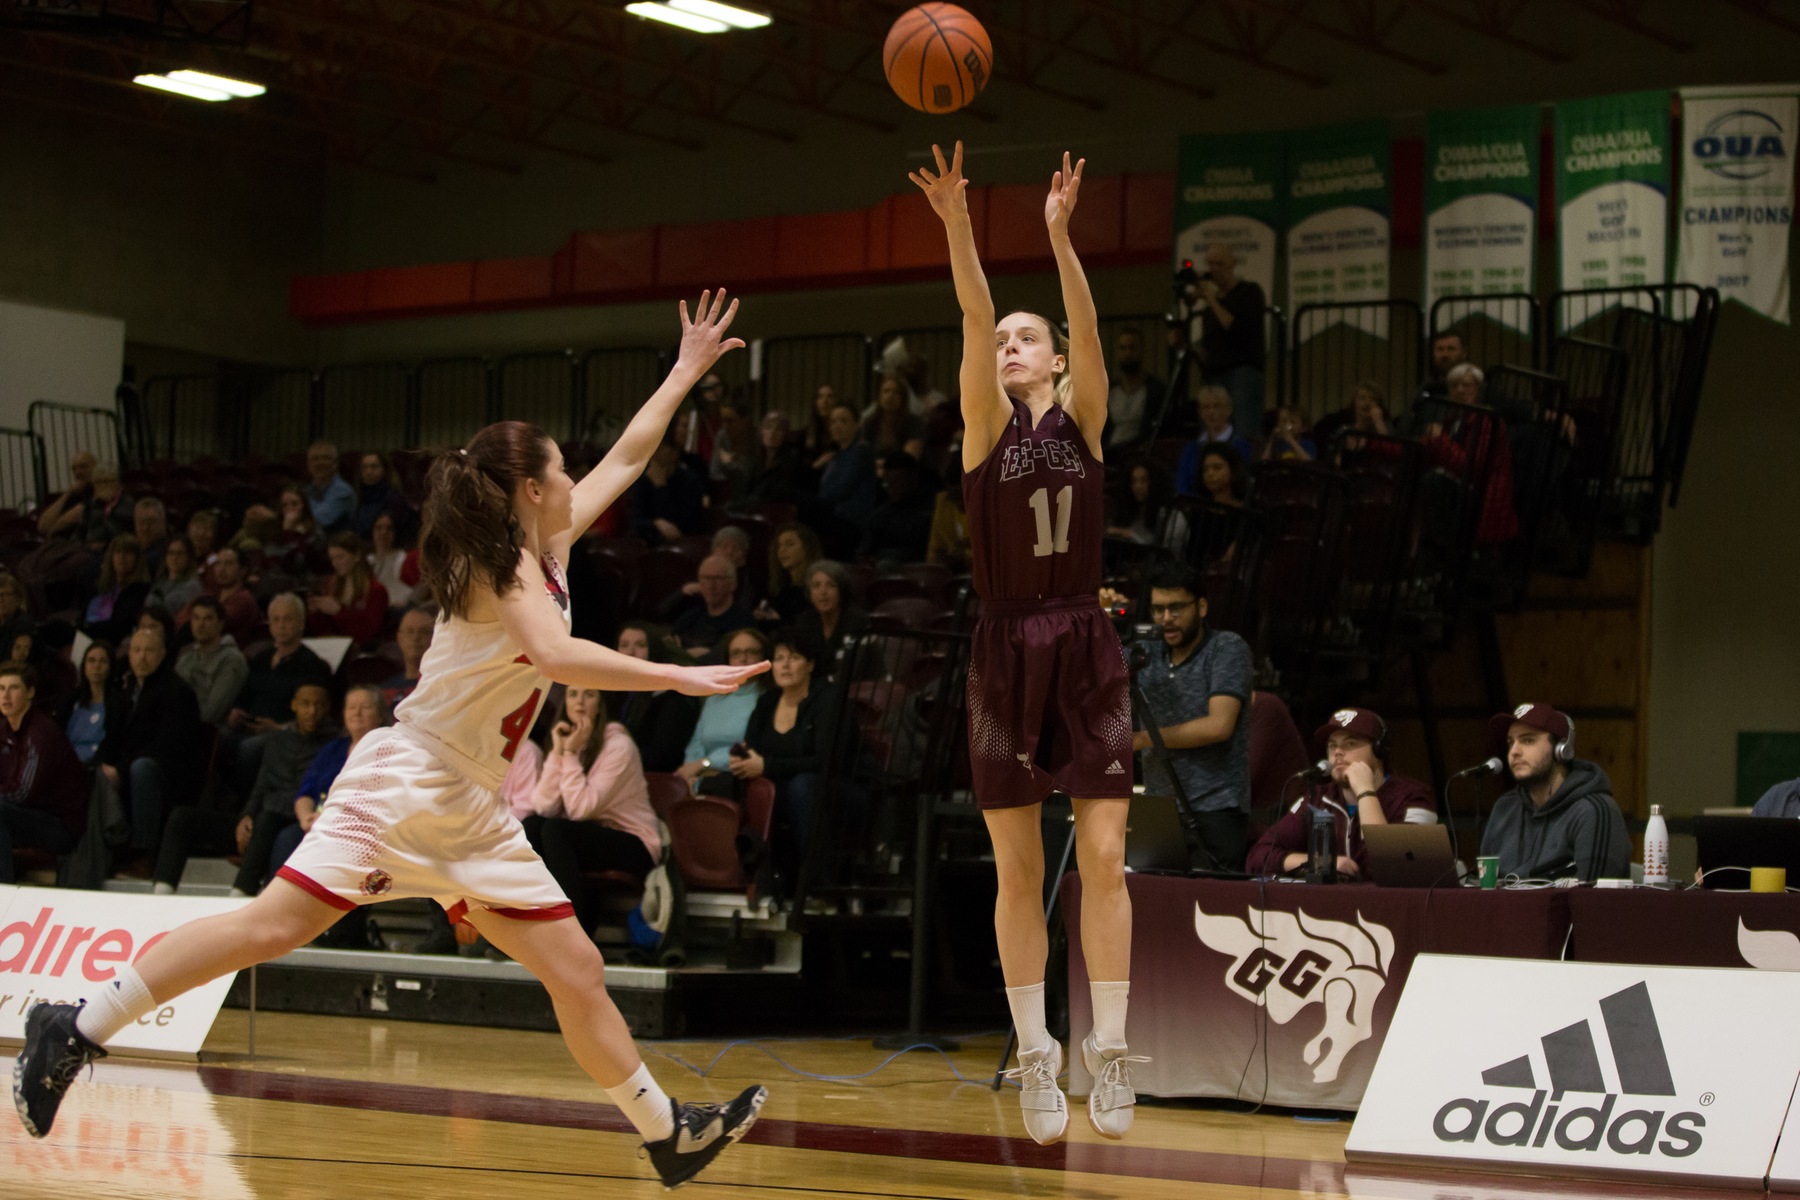 Women's basketball player shoots in front of crowd at Montpetit Hall.